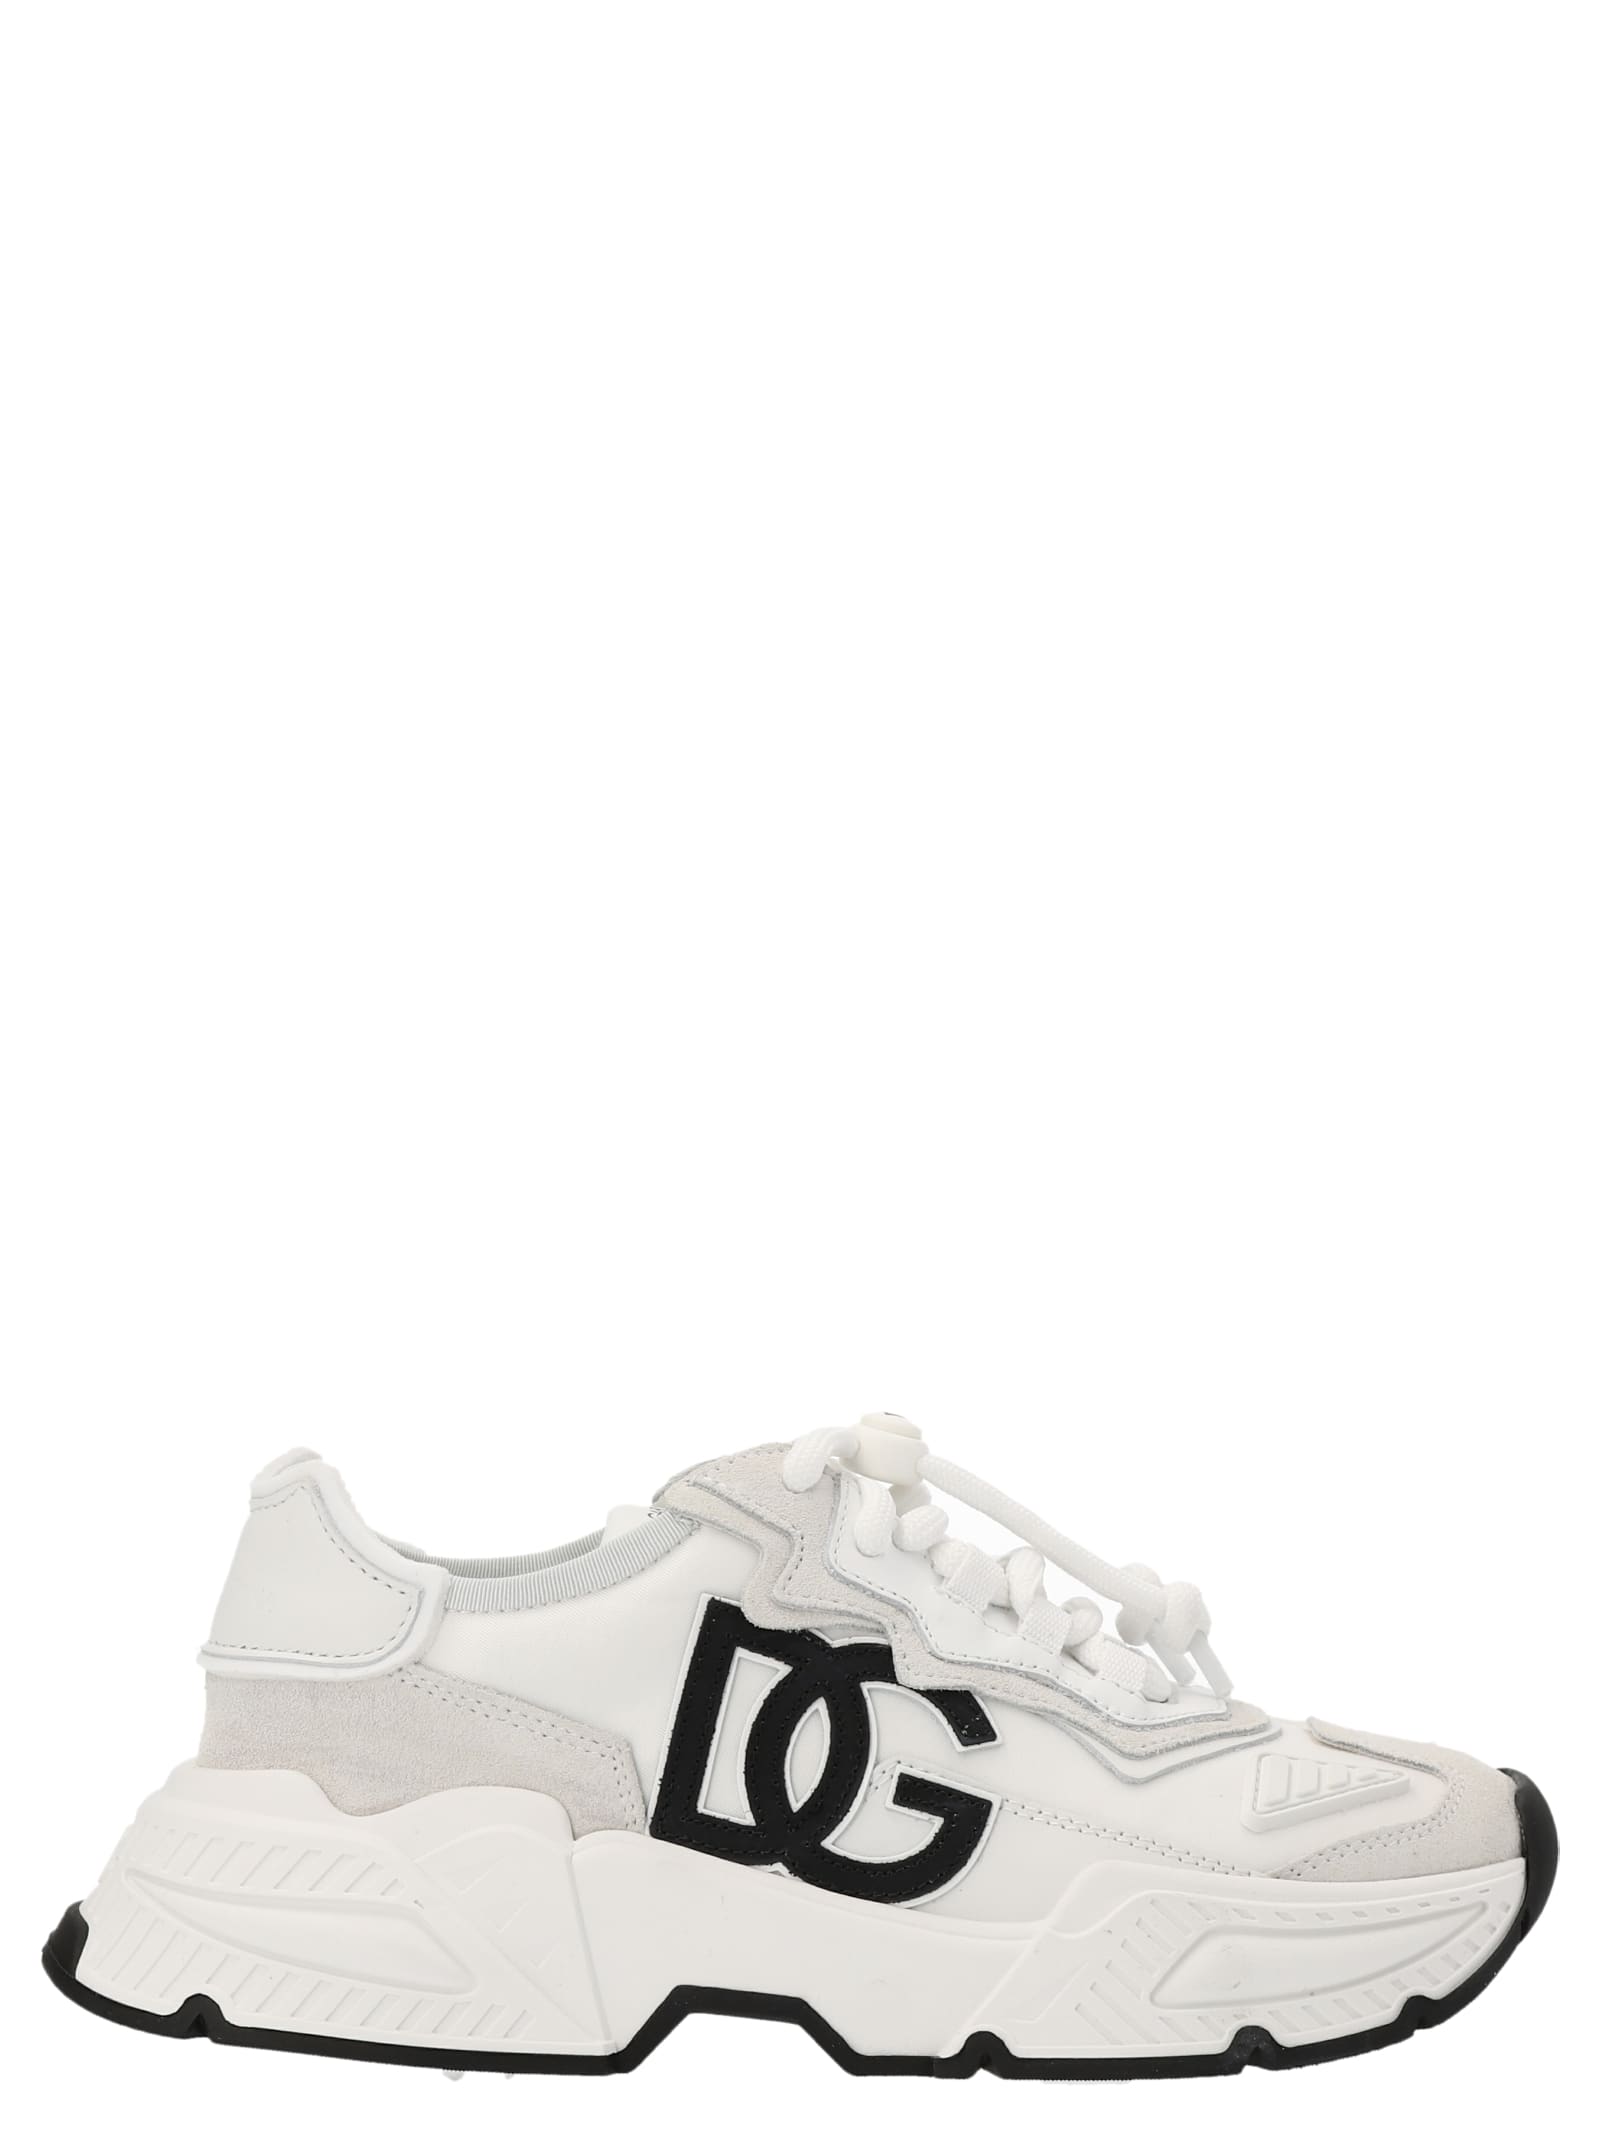 Dolce & Gabbana essential Sneakers